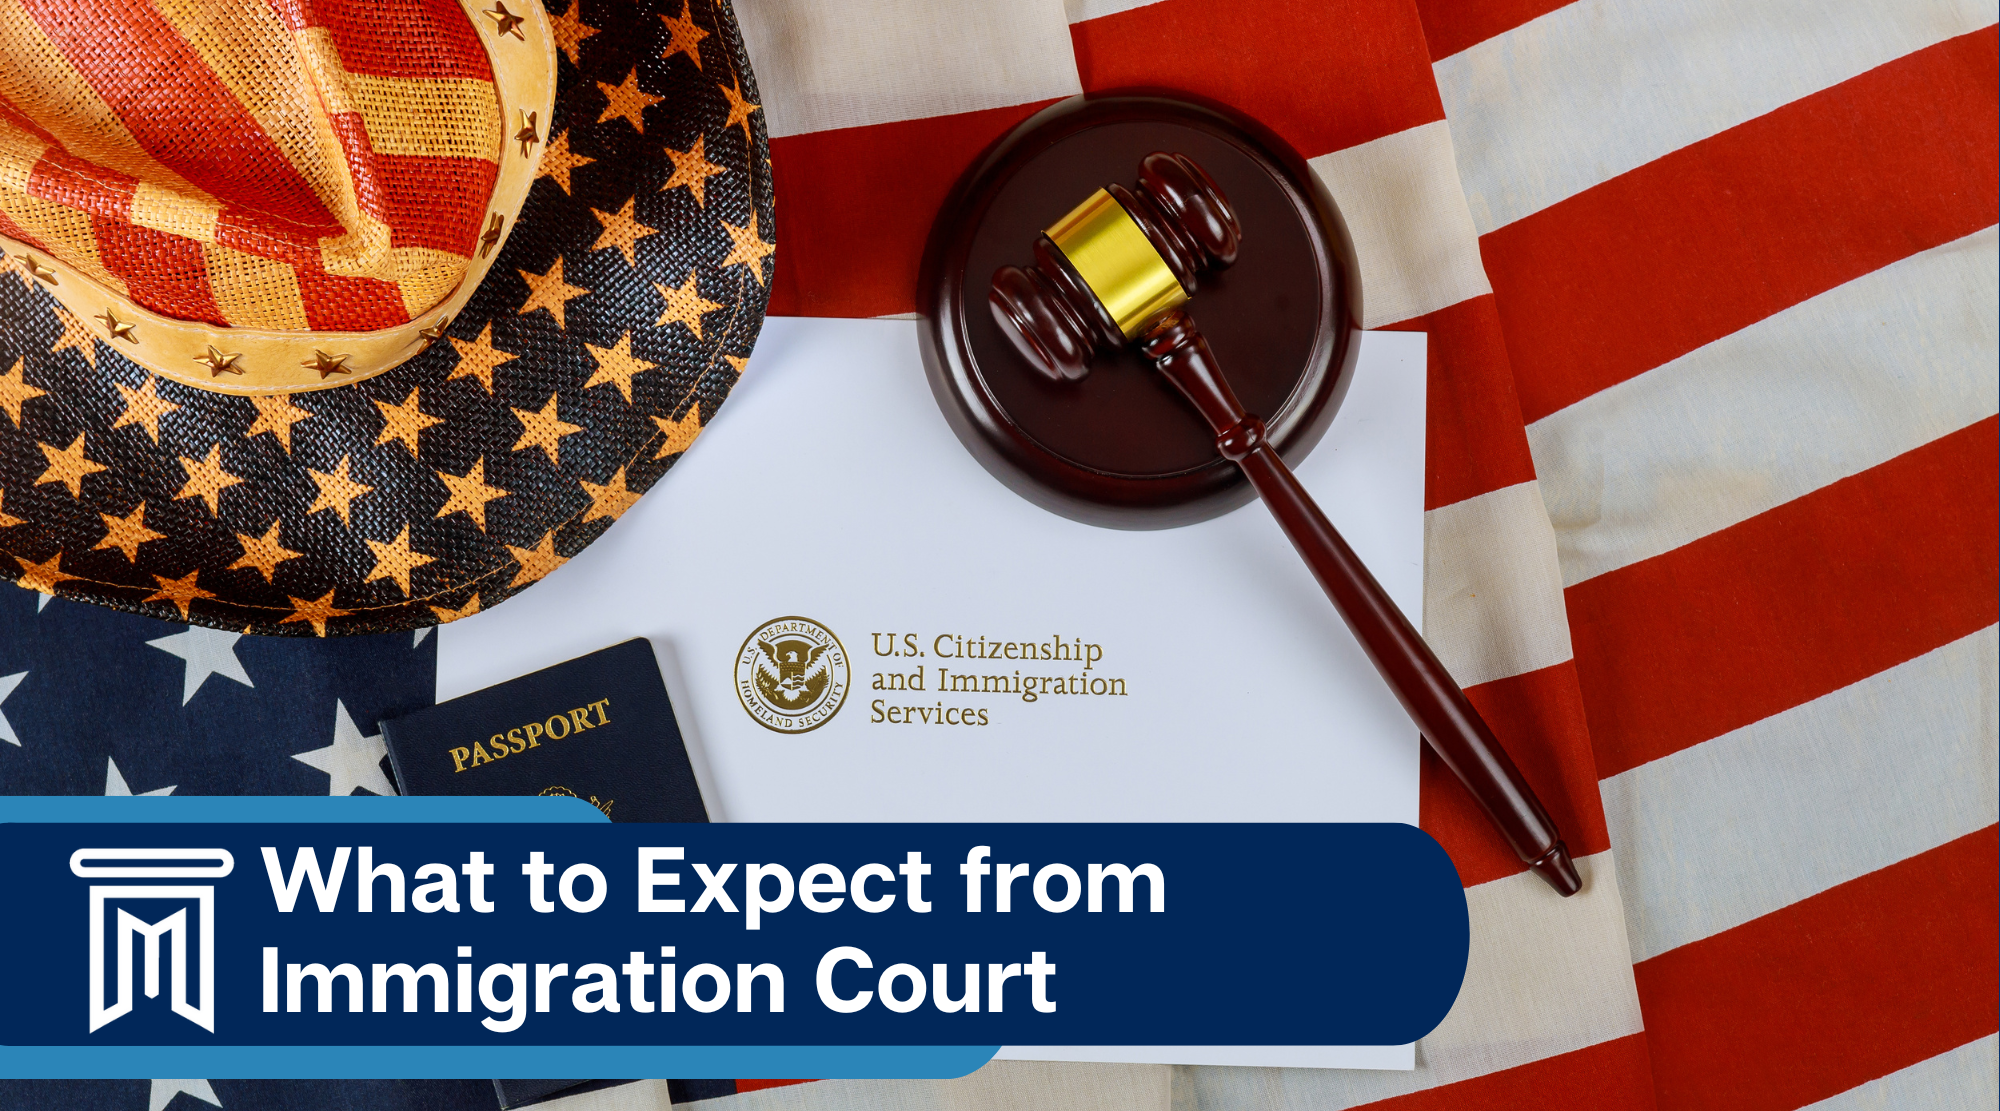 What to expect from immigration court